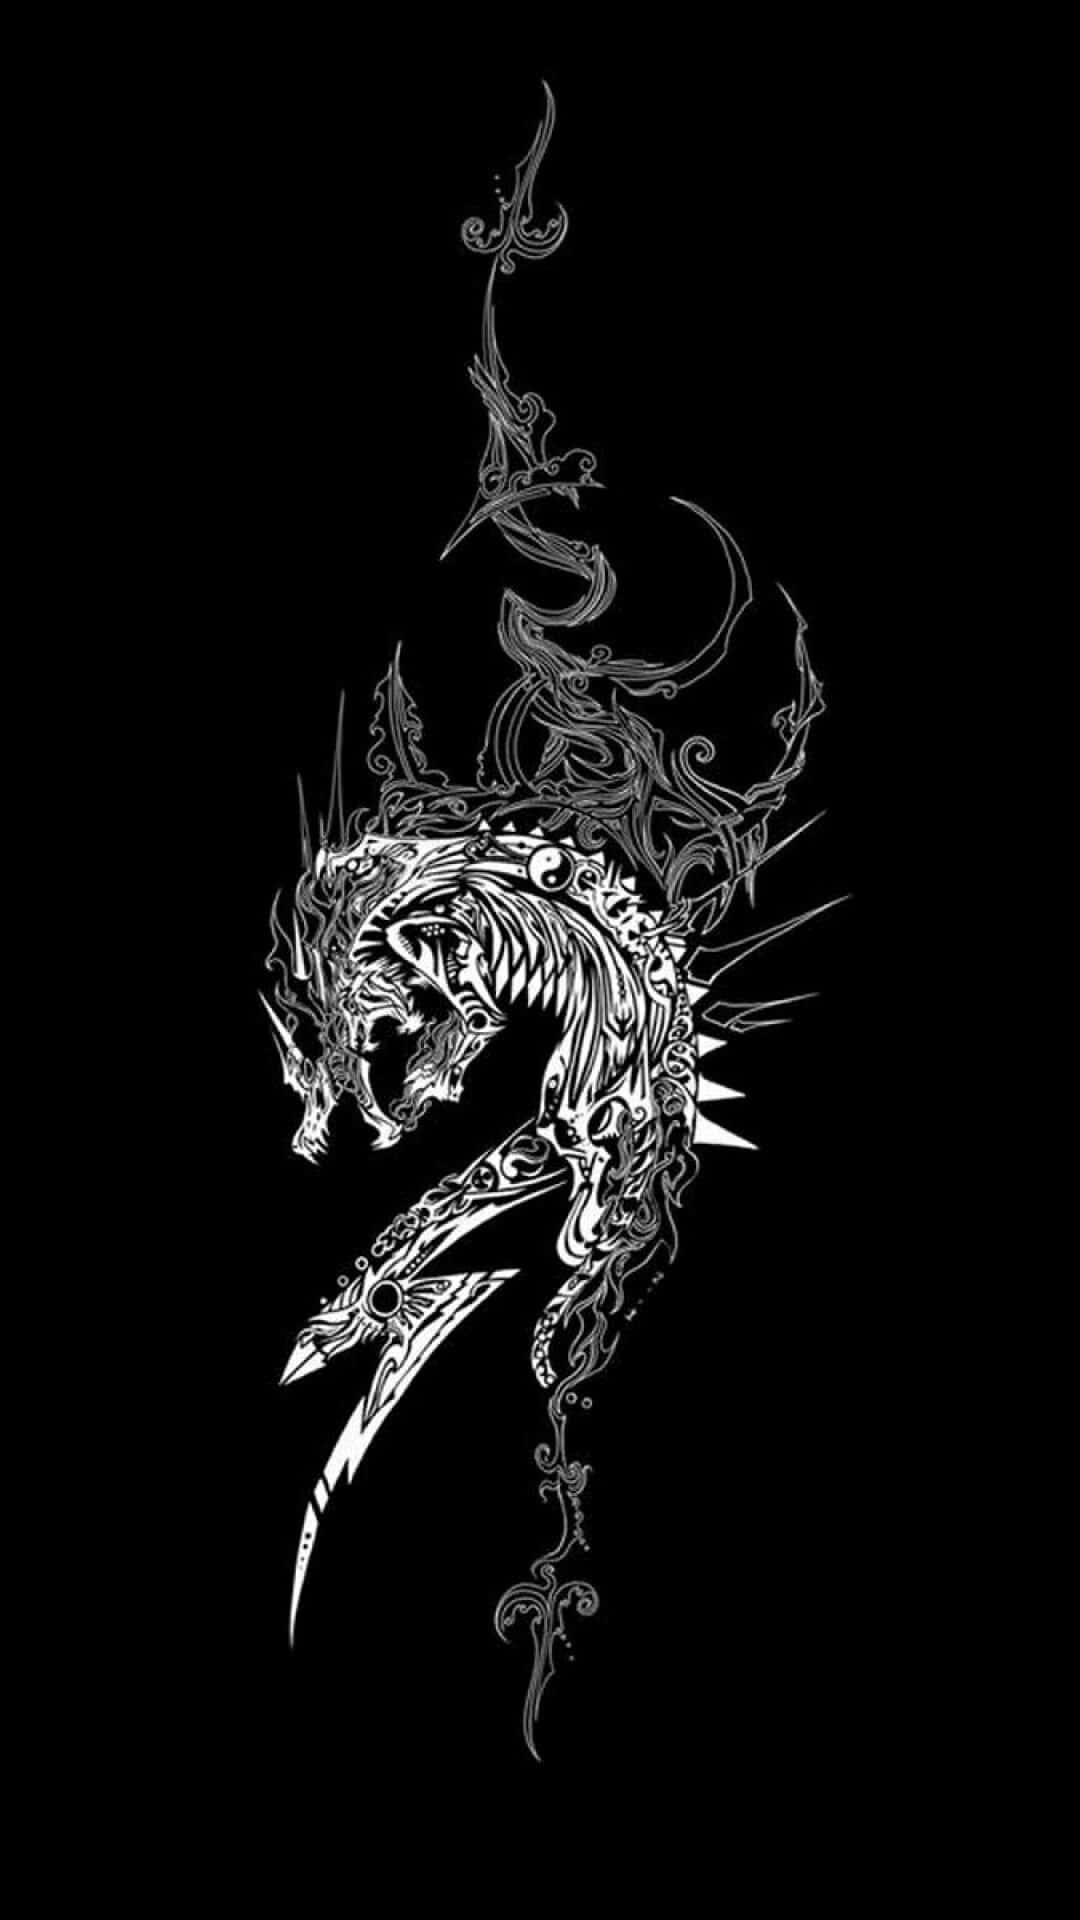 A Black And White Dragon Tattoo On A Black Background Wallpaper